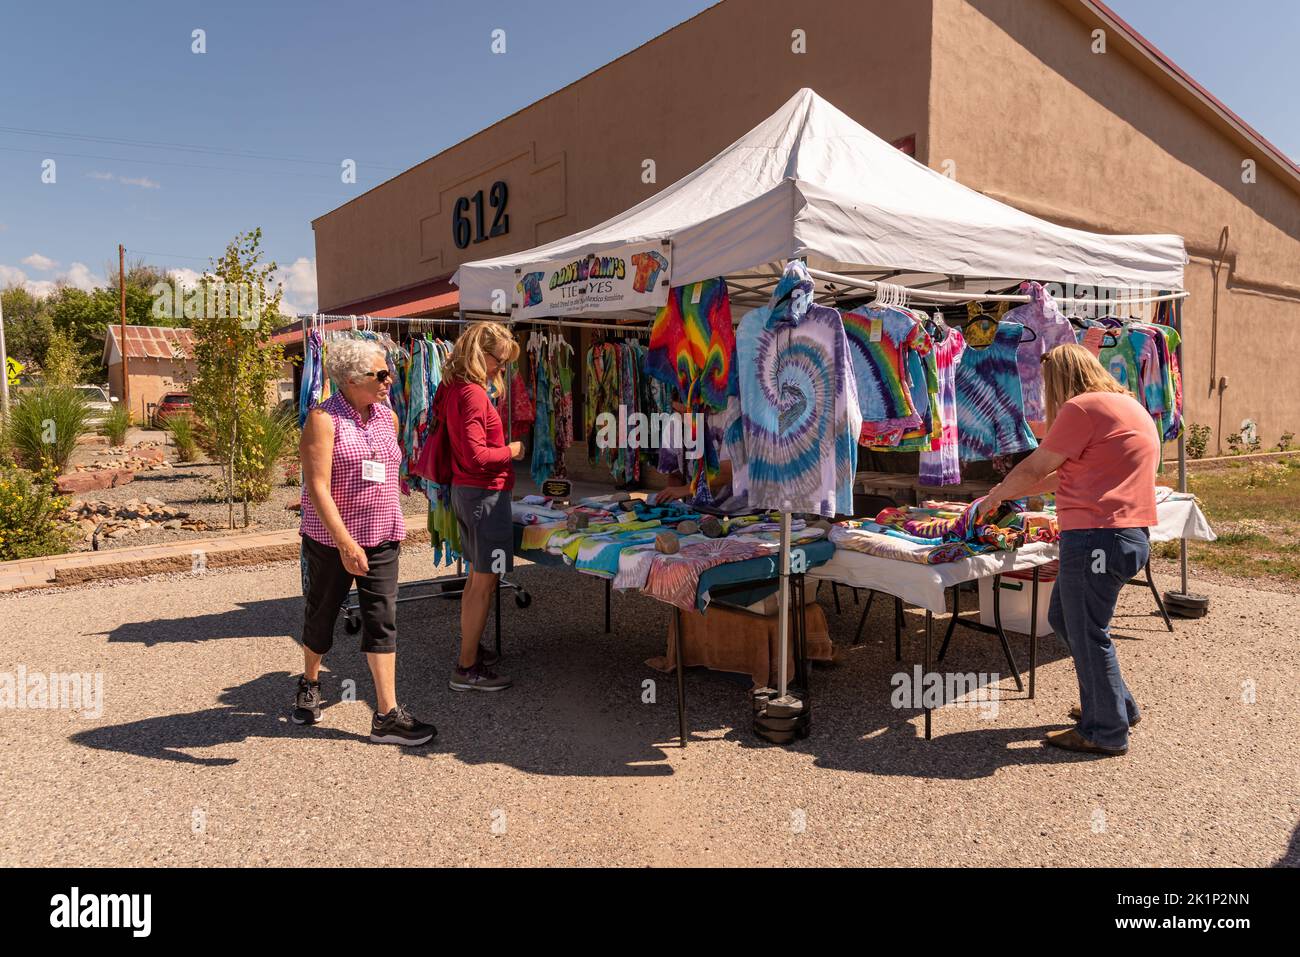 Shoppers look at Tie Dyed t-shirts at the Chama Valley Arts Festival in Chama, Rio Arriba County, New Mexico. Stock Photo